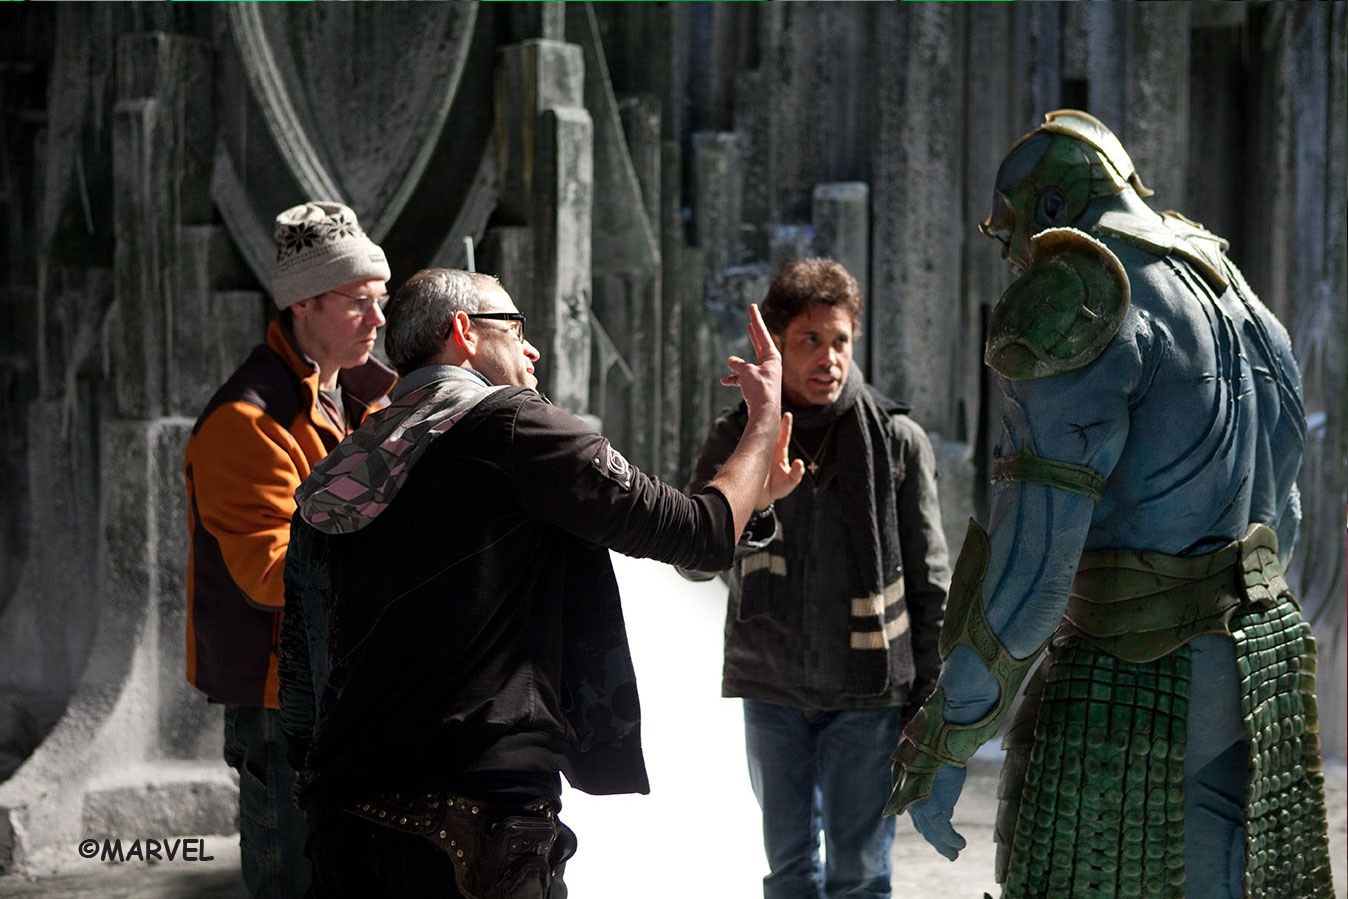 Providing direction to a frost giant